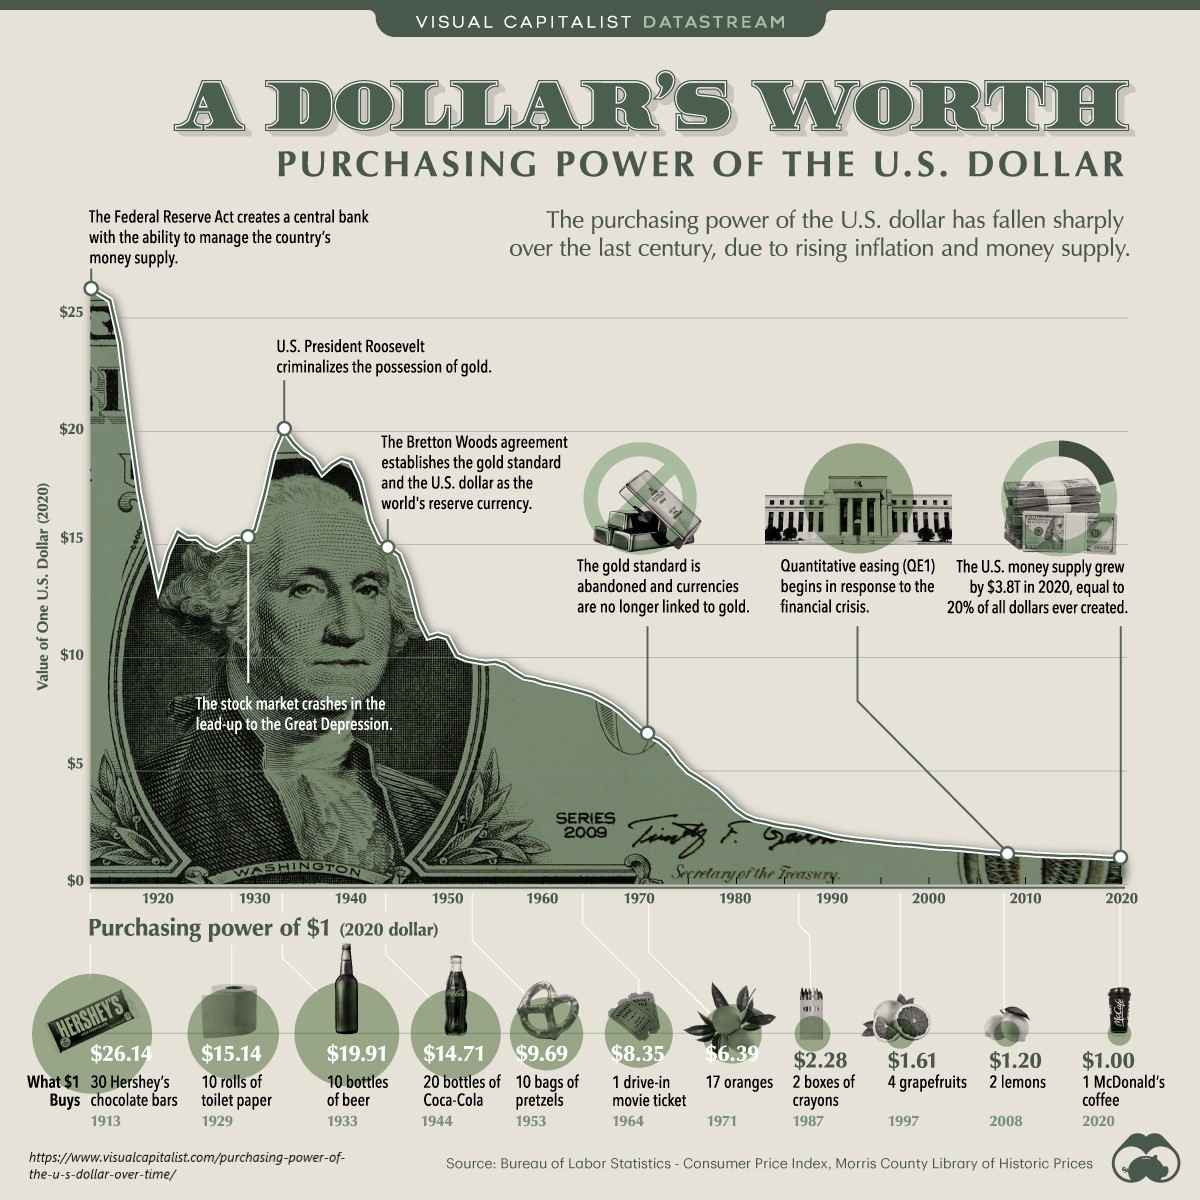 purchasing-power-of-the-u.s.-dollar-over-time.jpg